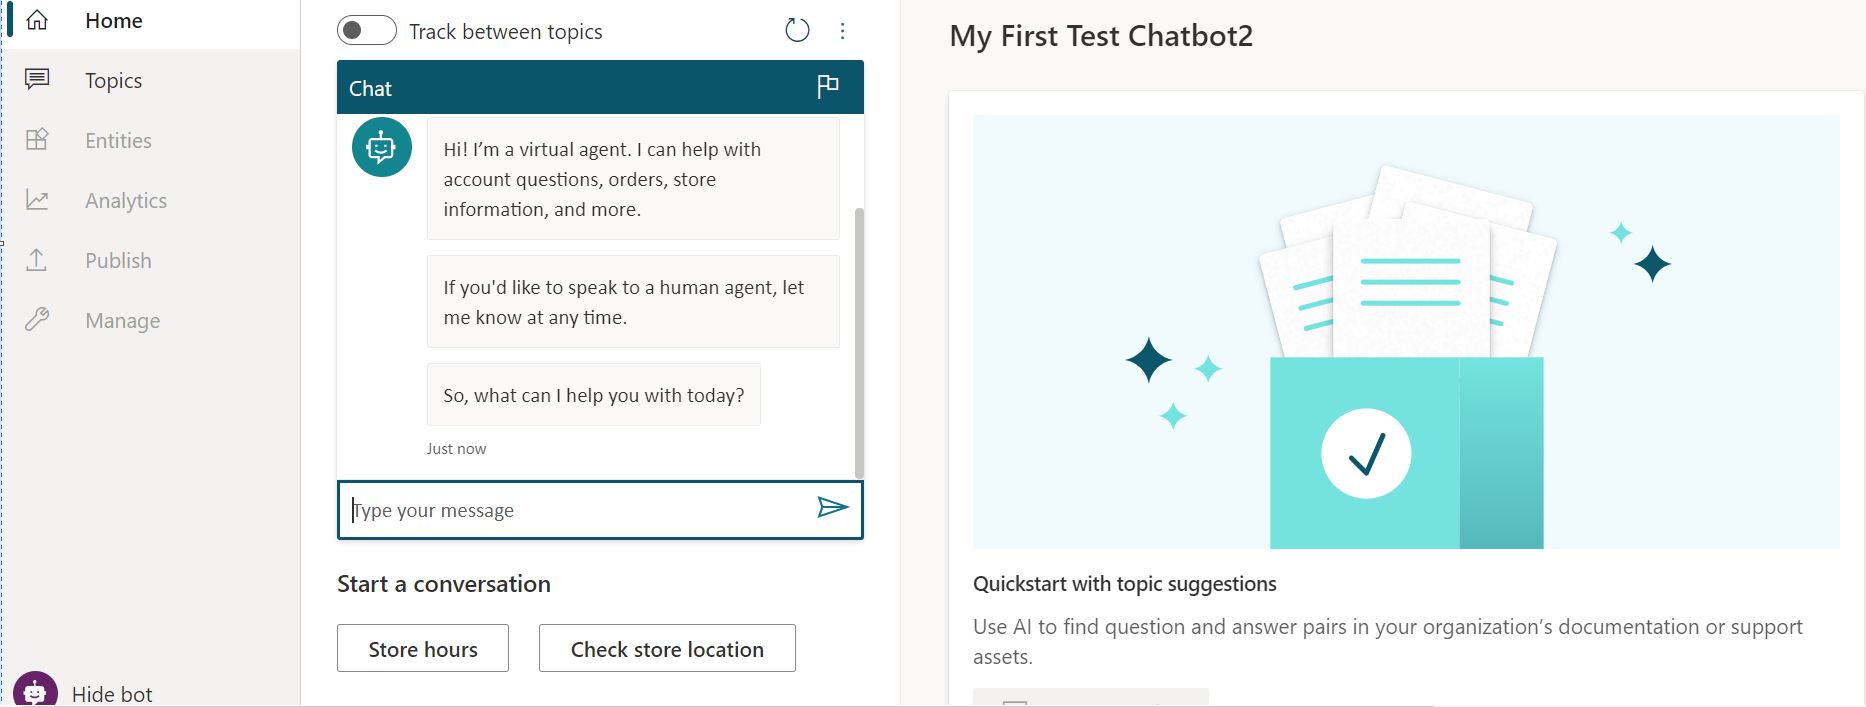 Create your own chatbot - Test your chatbot from Power Virtual Agents - Demo